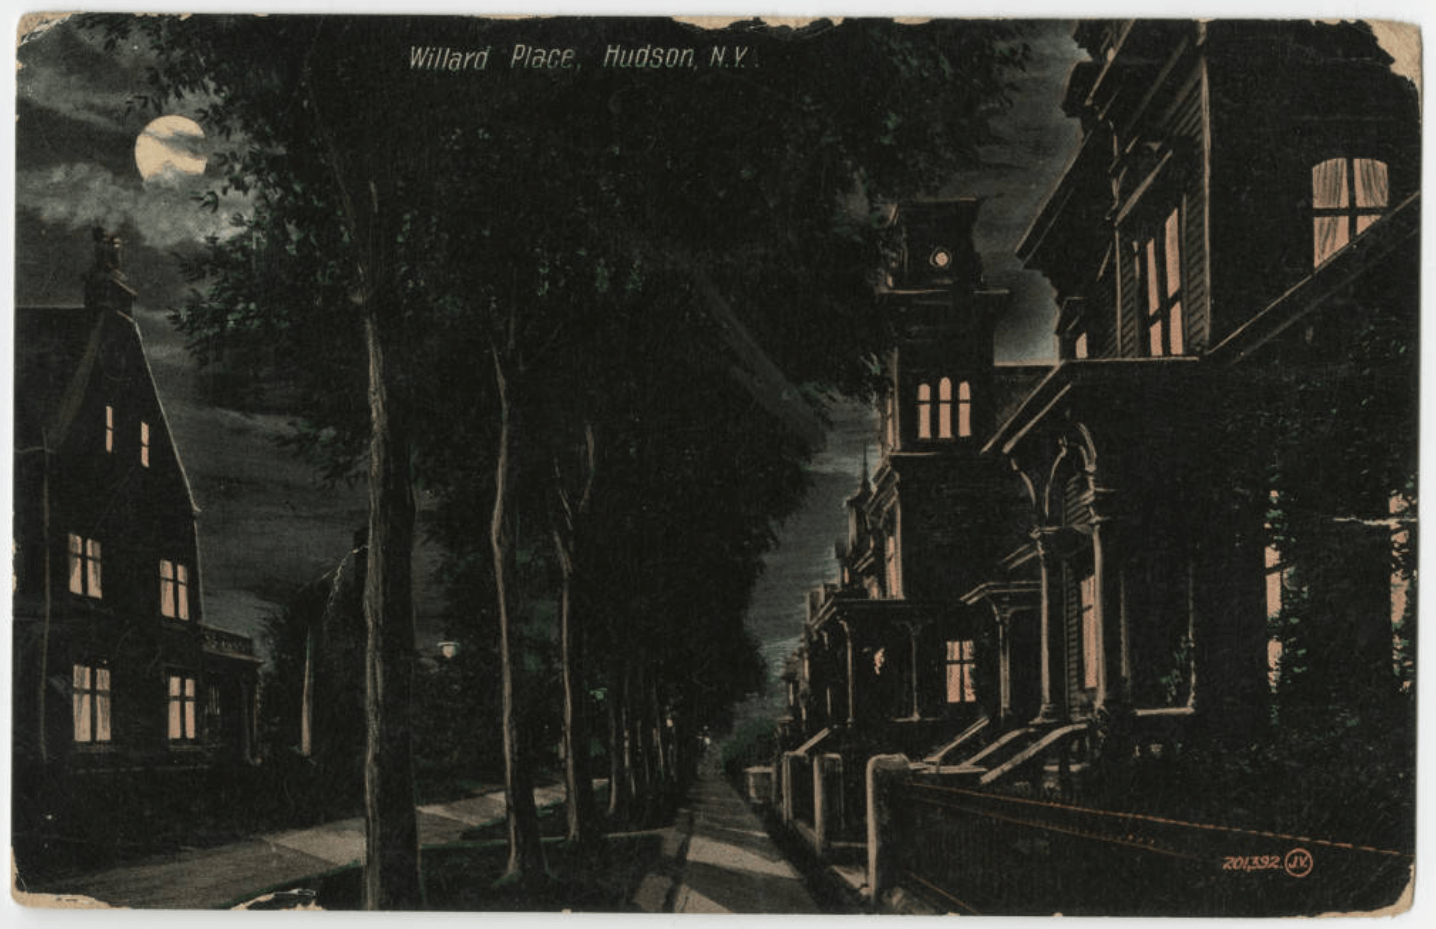 An early 20th century postcard of Willard Place in the moonlight